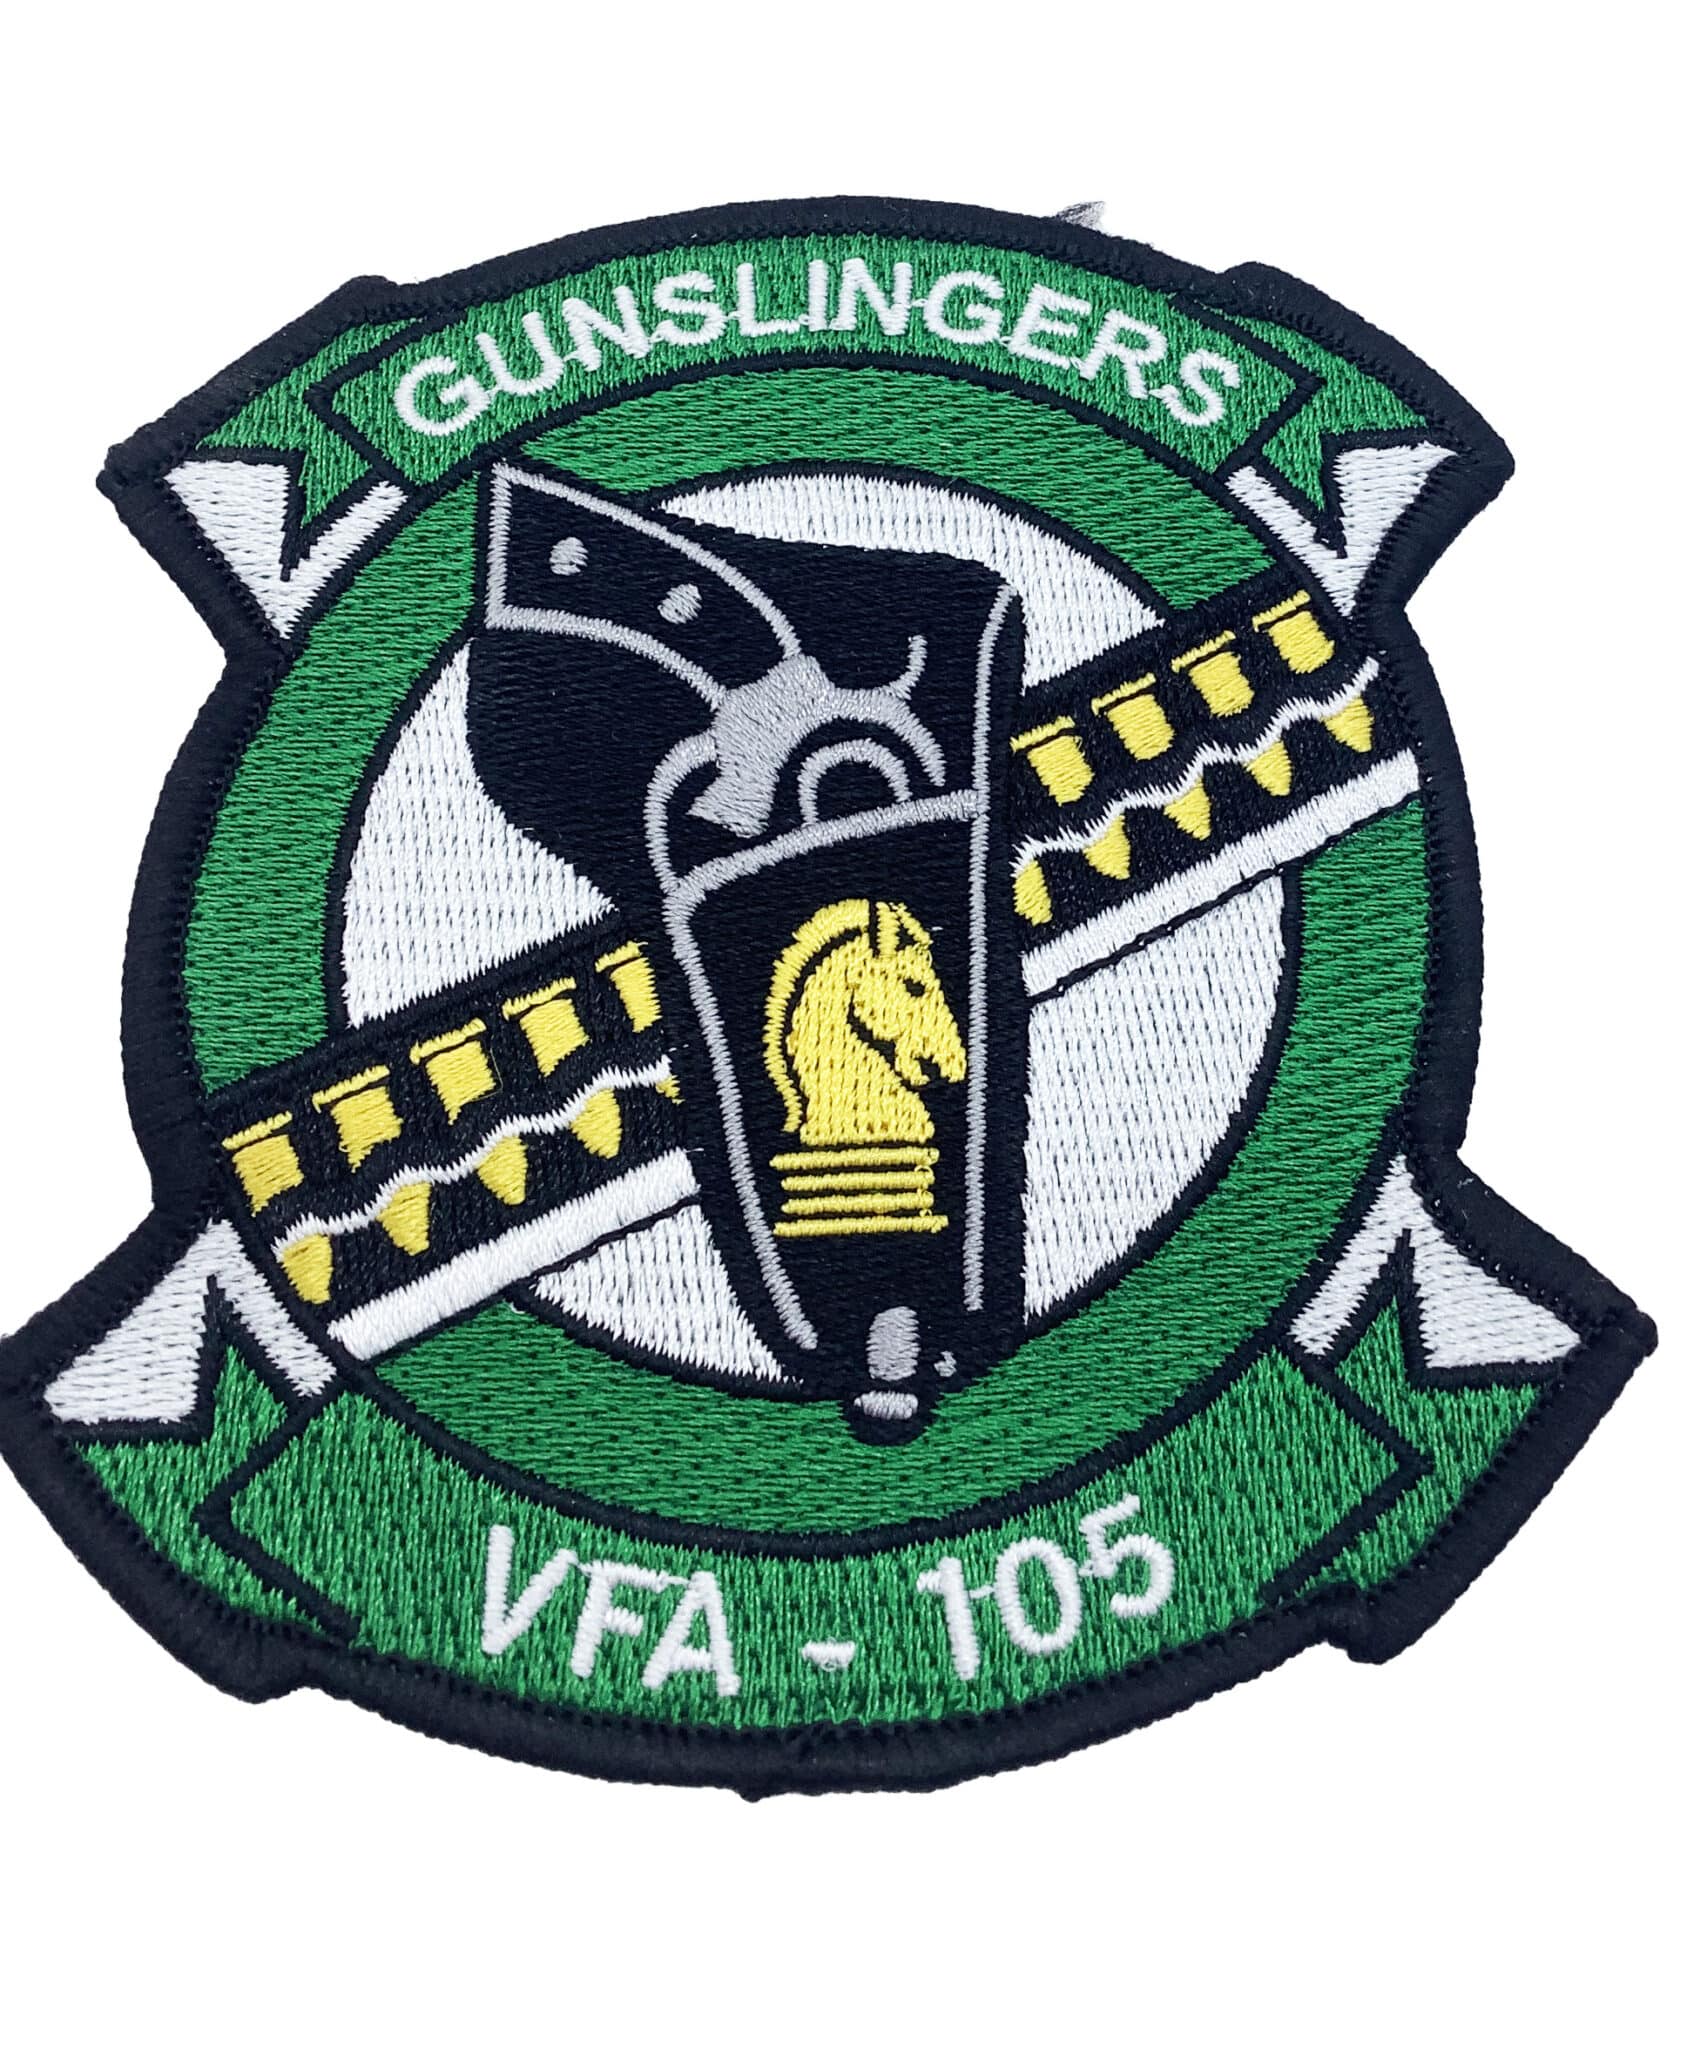 VFA-105 Gunslingers Patch – With Hook and Loop